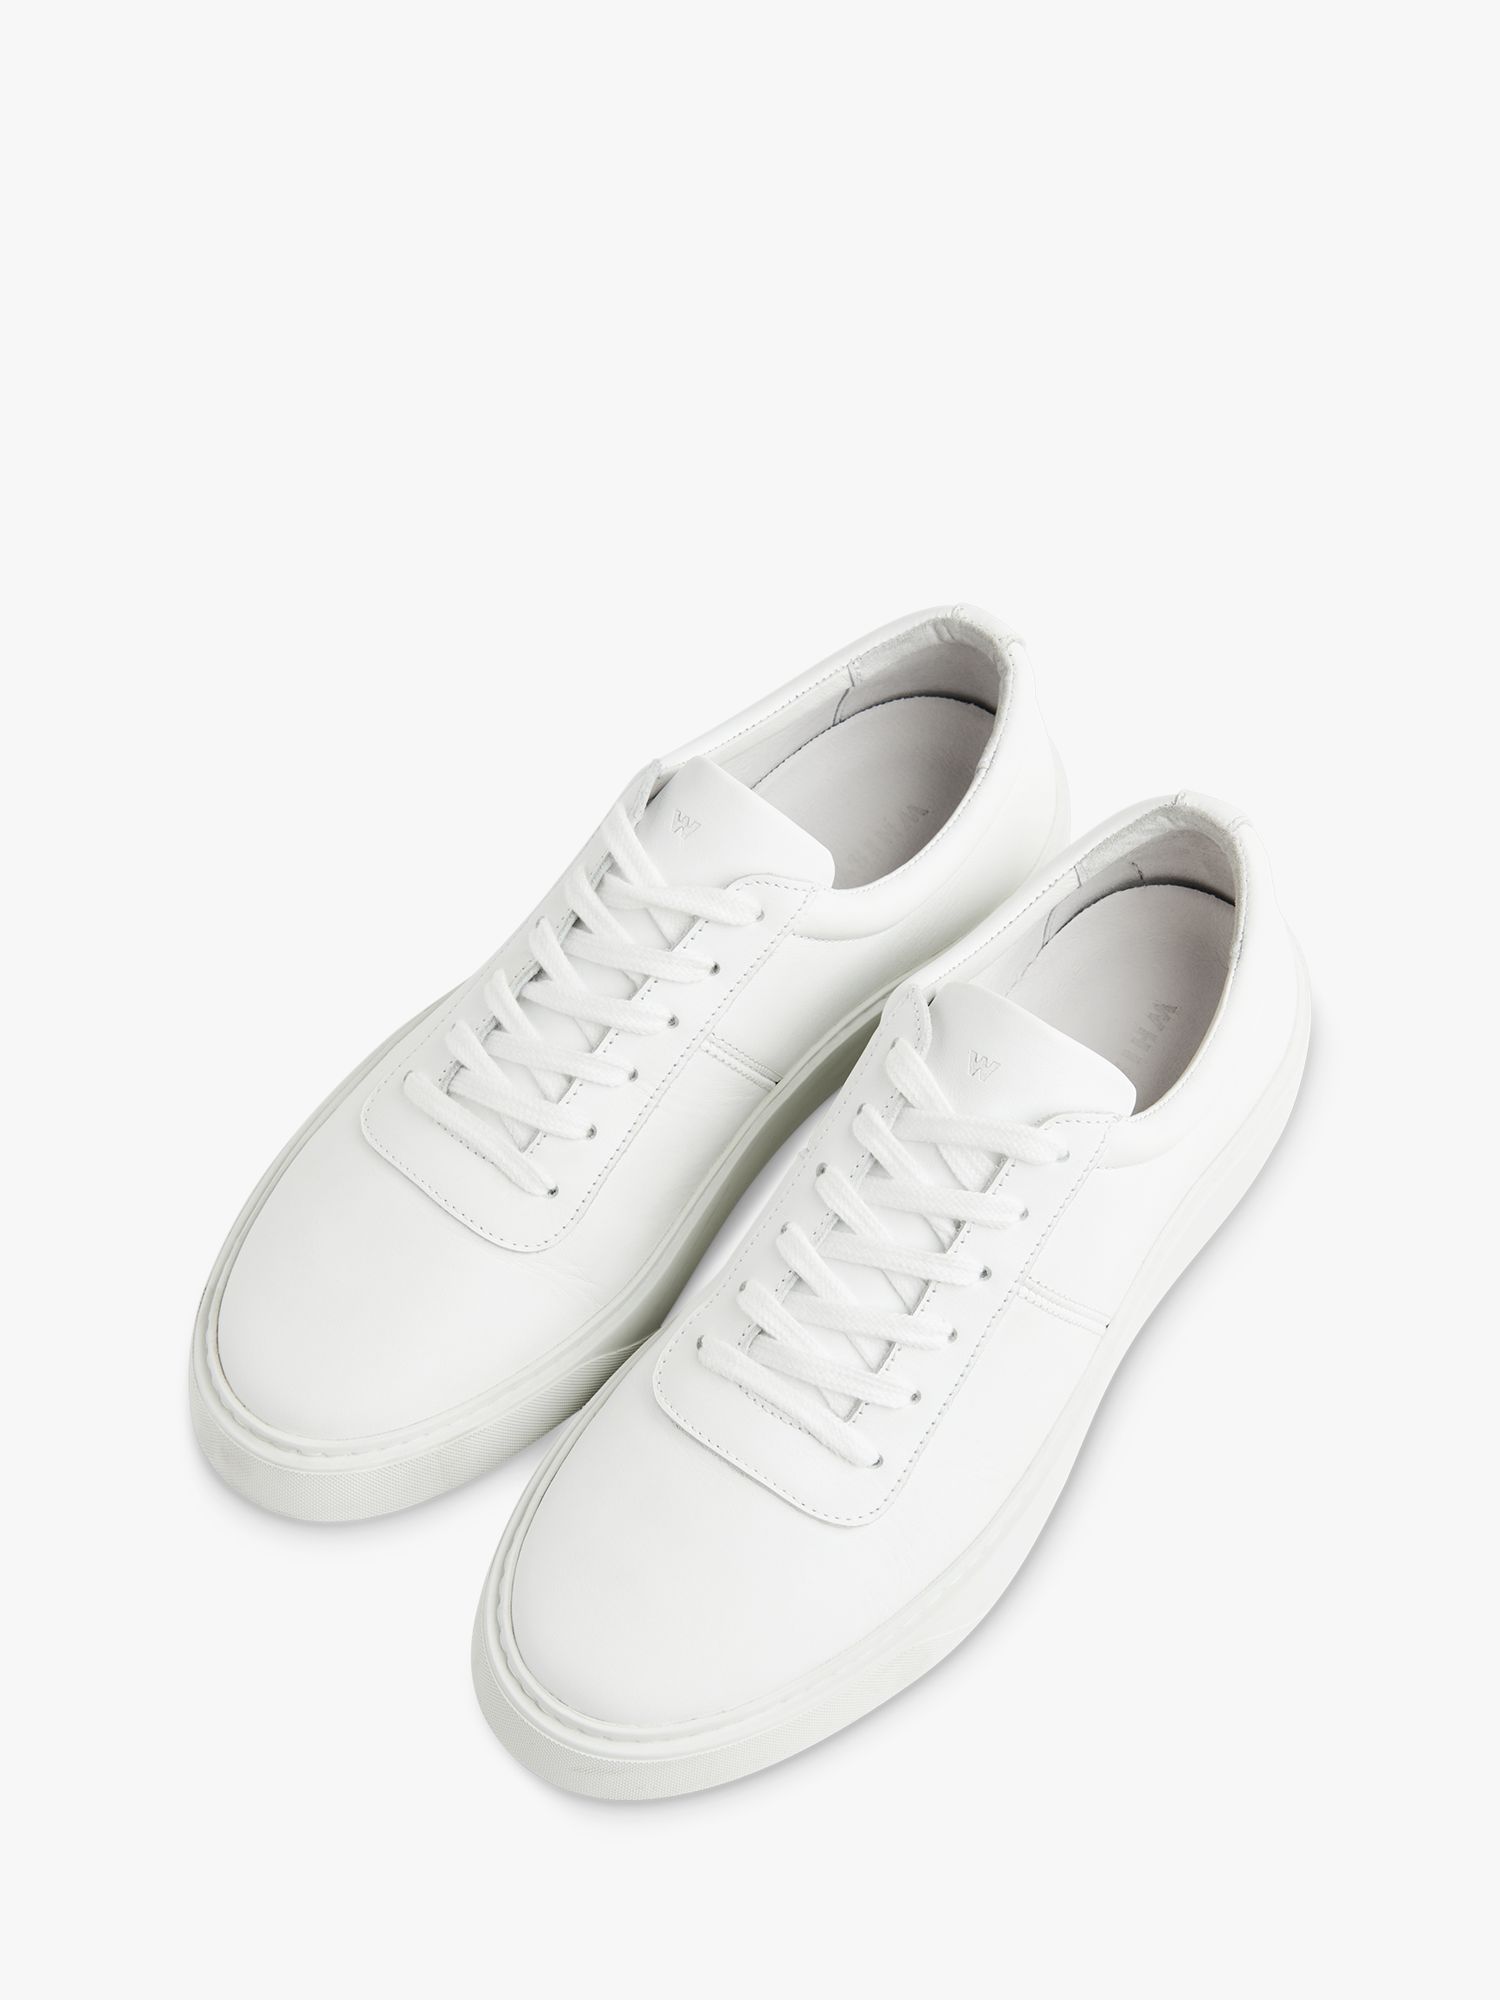 Whistles Kalie Leather Deep Sole Trainers, White at John Lewis & Partners